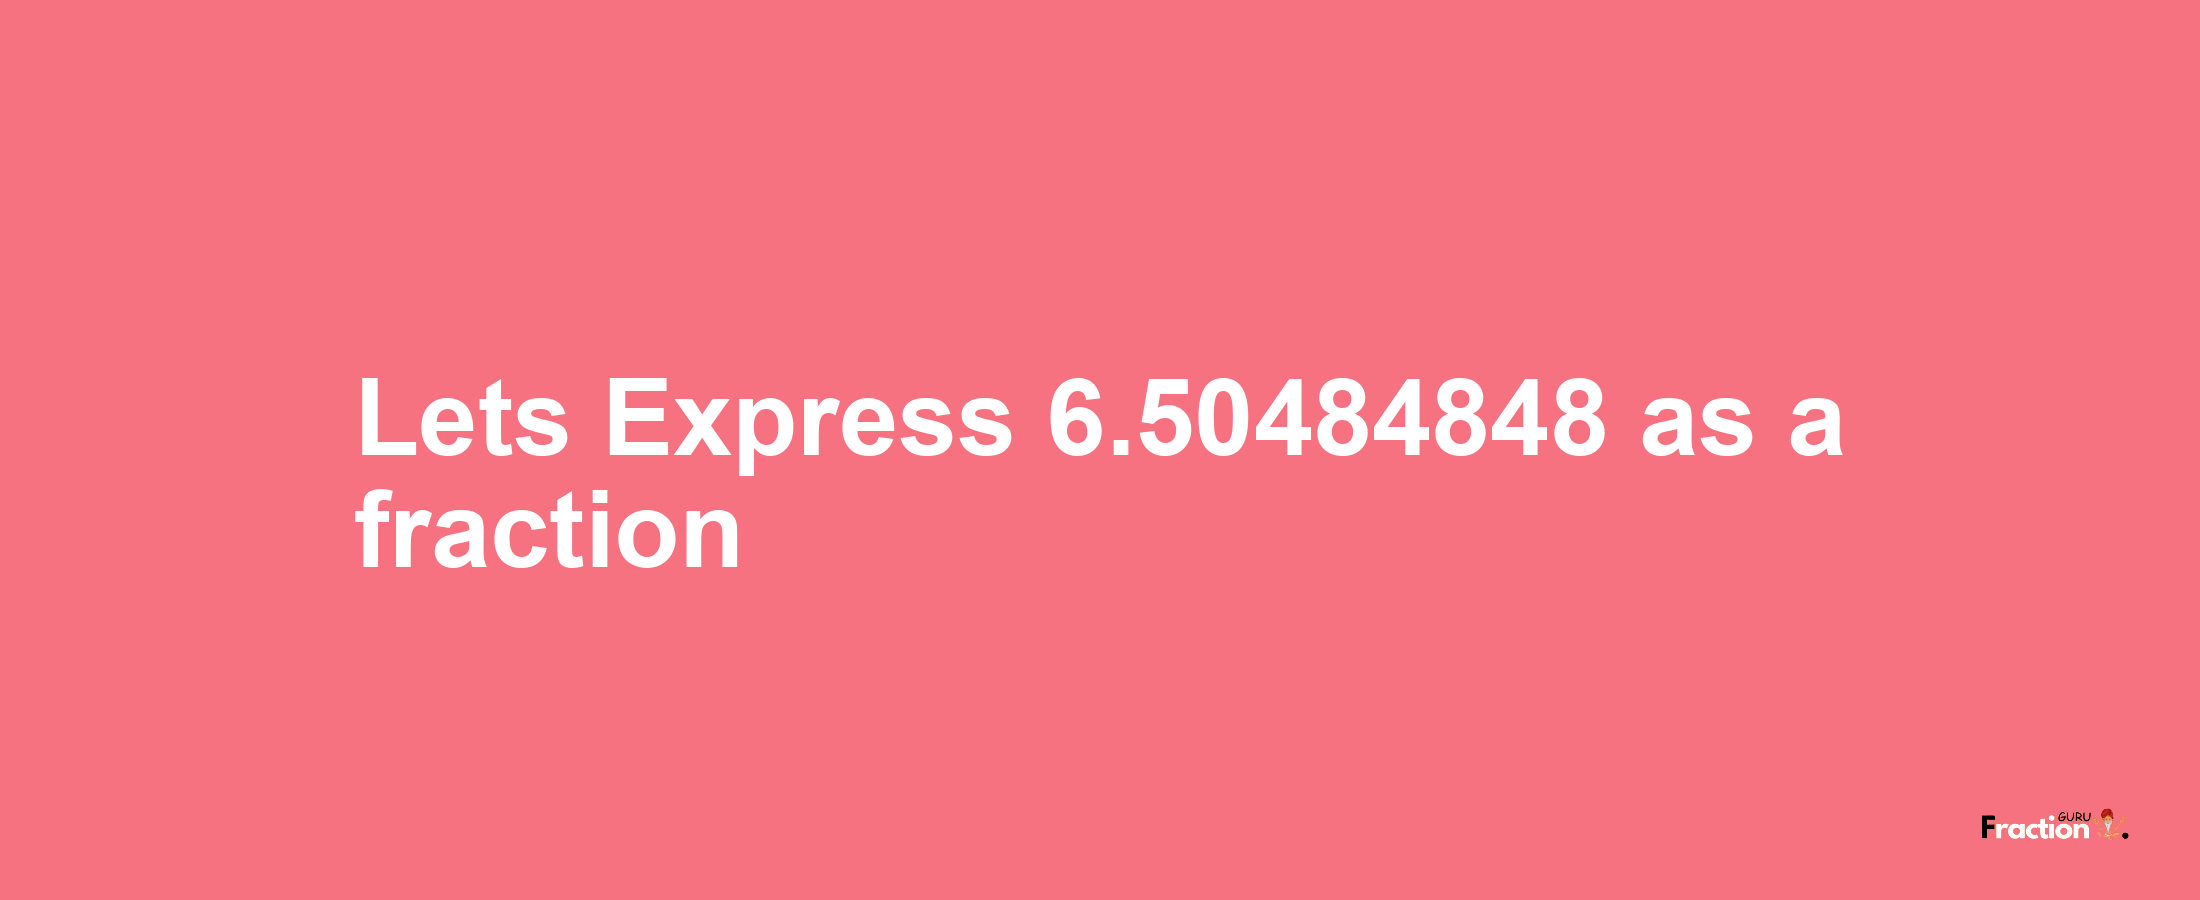 Lets Express 6.50484848 as afraction